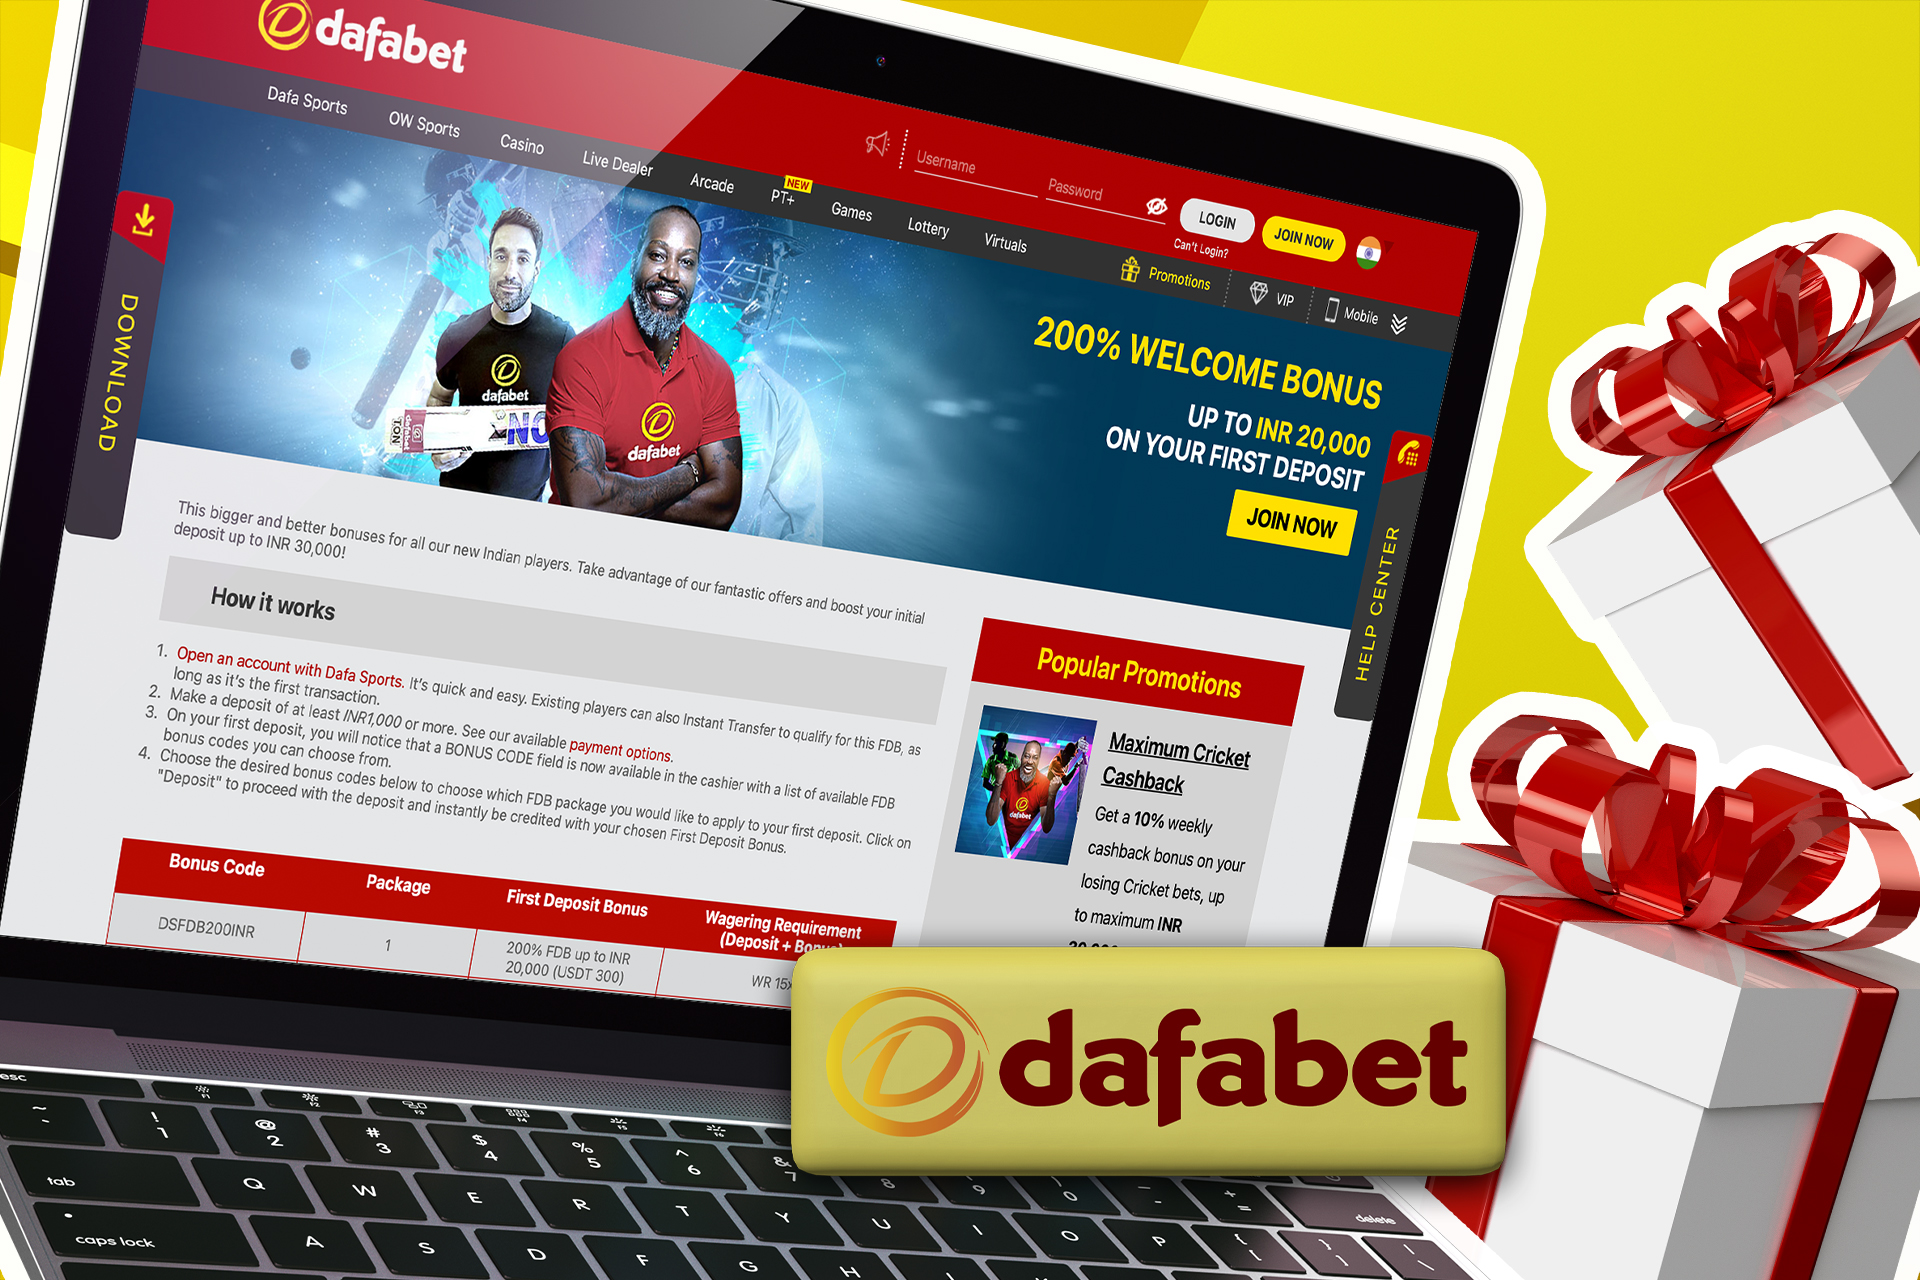 Dafabet offers new players a welcome bonus of up to 160% to their first deposit.